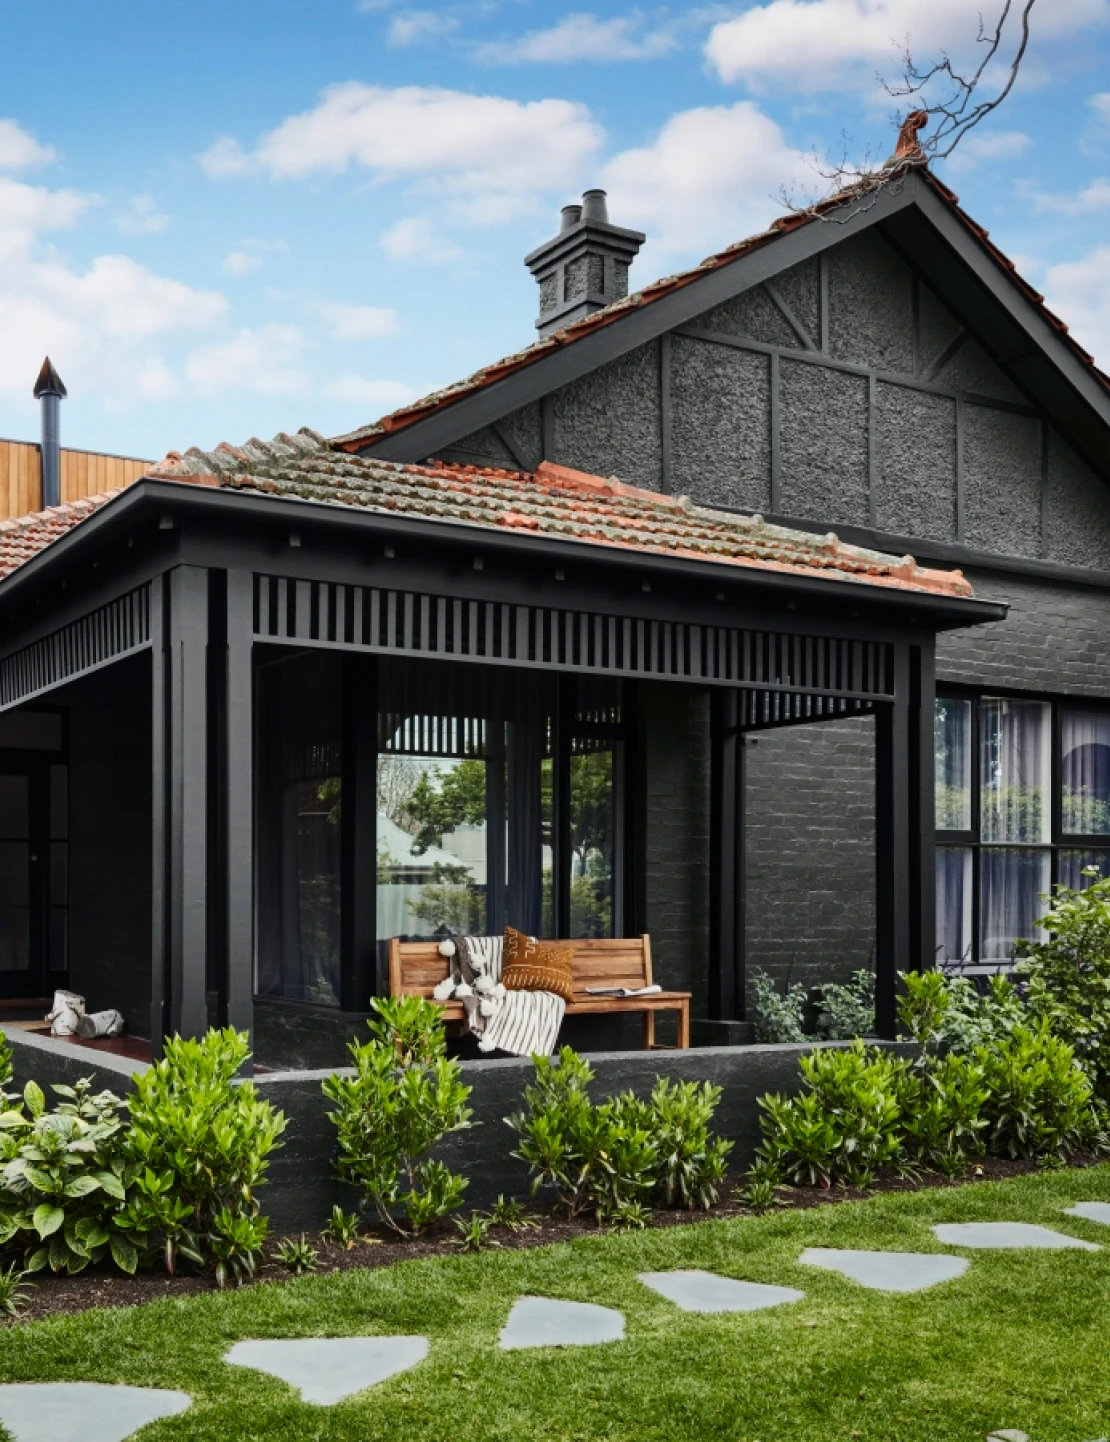 Dark exterior style house with Dulux Domino and Teahouse colours and a green garden.